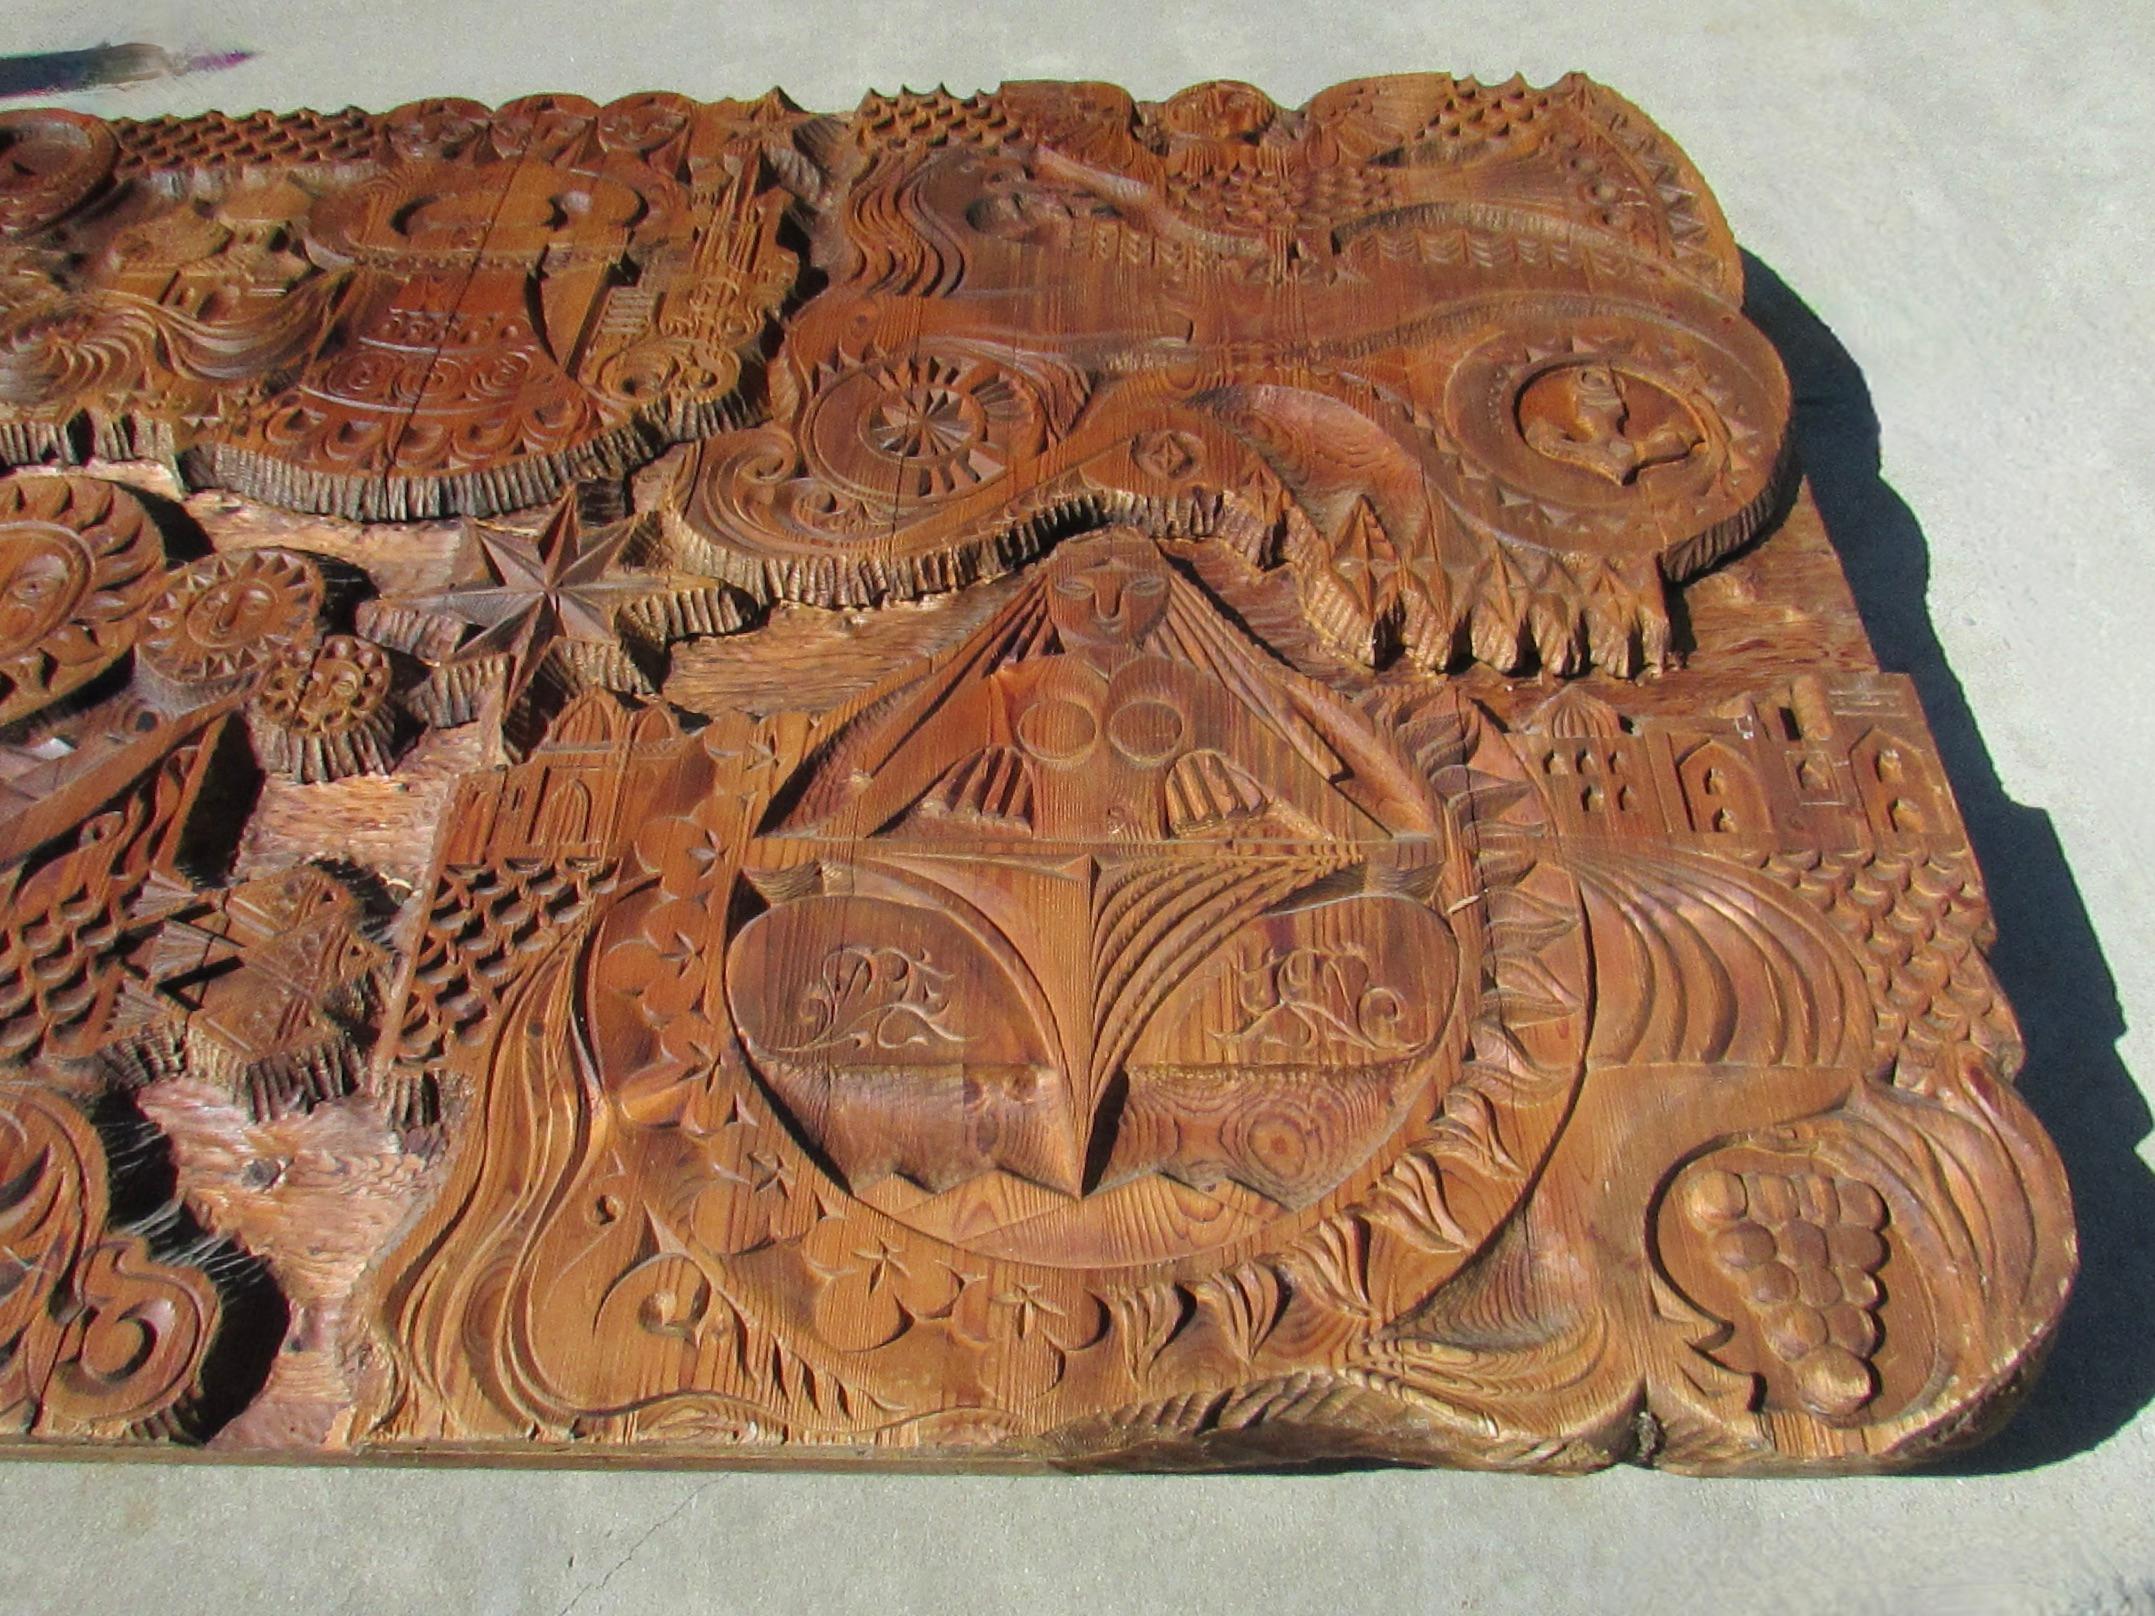 Large impressive Eastern European Folk Art carved Cedar panel. Large panel feature mythical creatures and symbols. Mermaids, Sirens, anchors, Sun Muscovite style buildings. Carving is mounted on stacked pieces of pine or Cedar . The panel is large